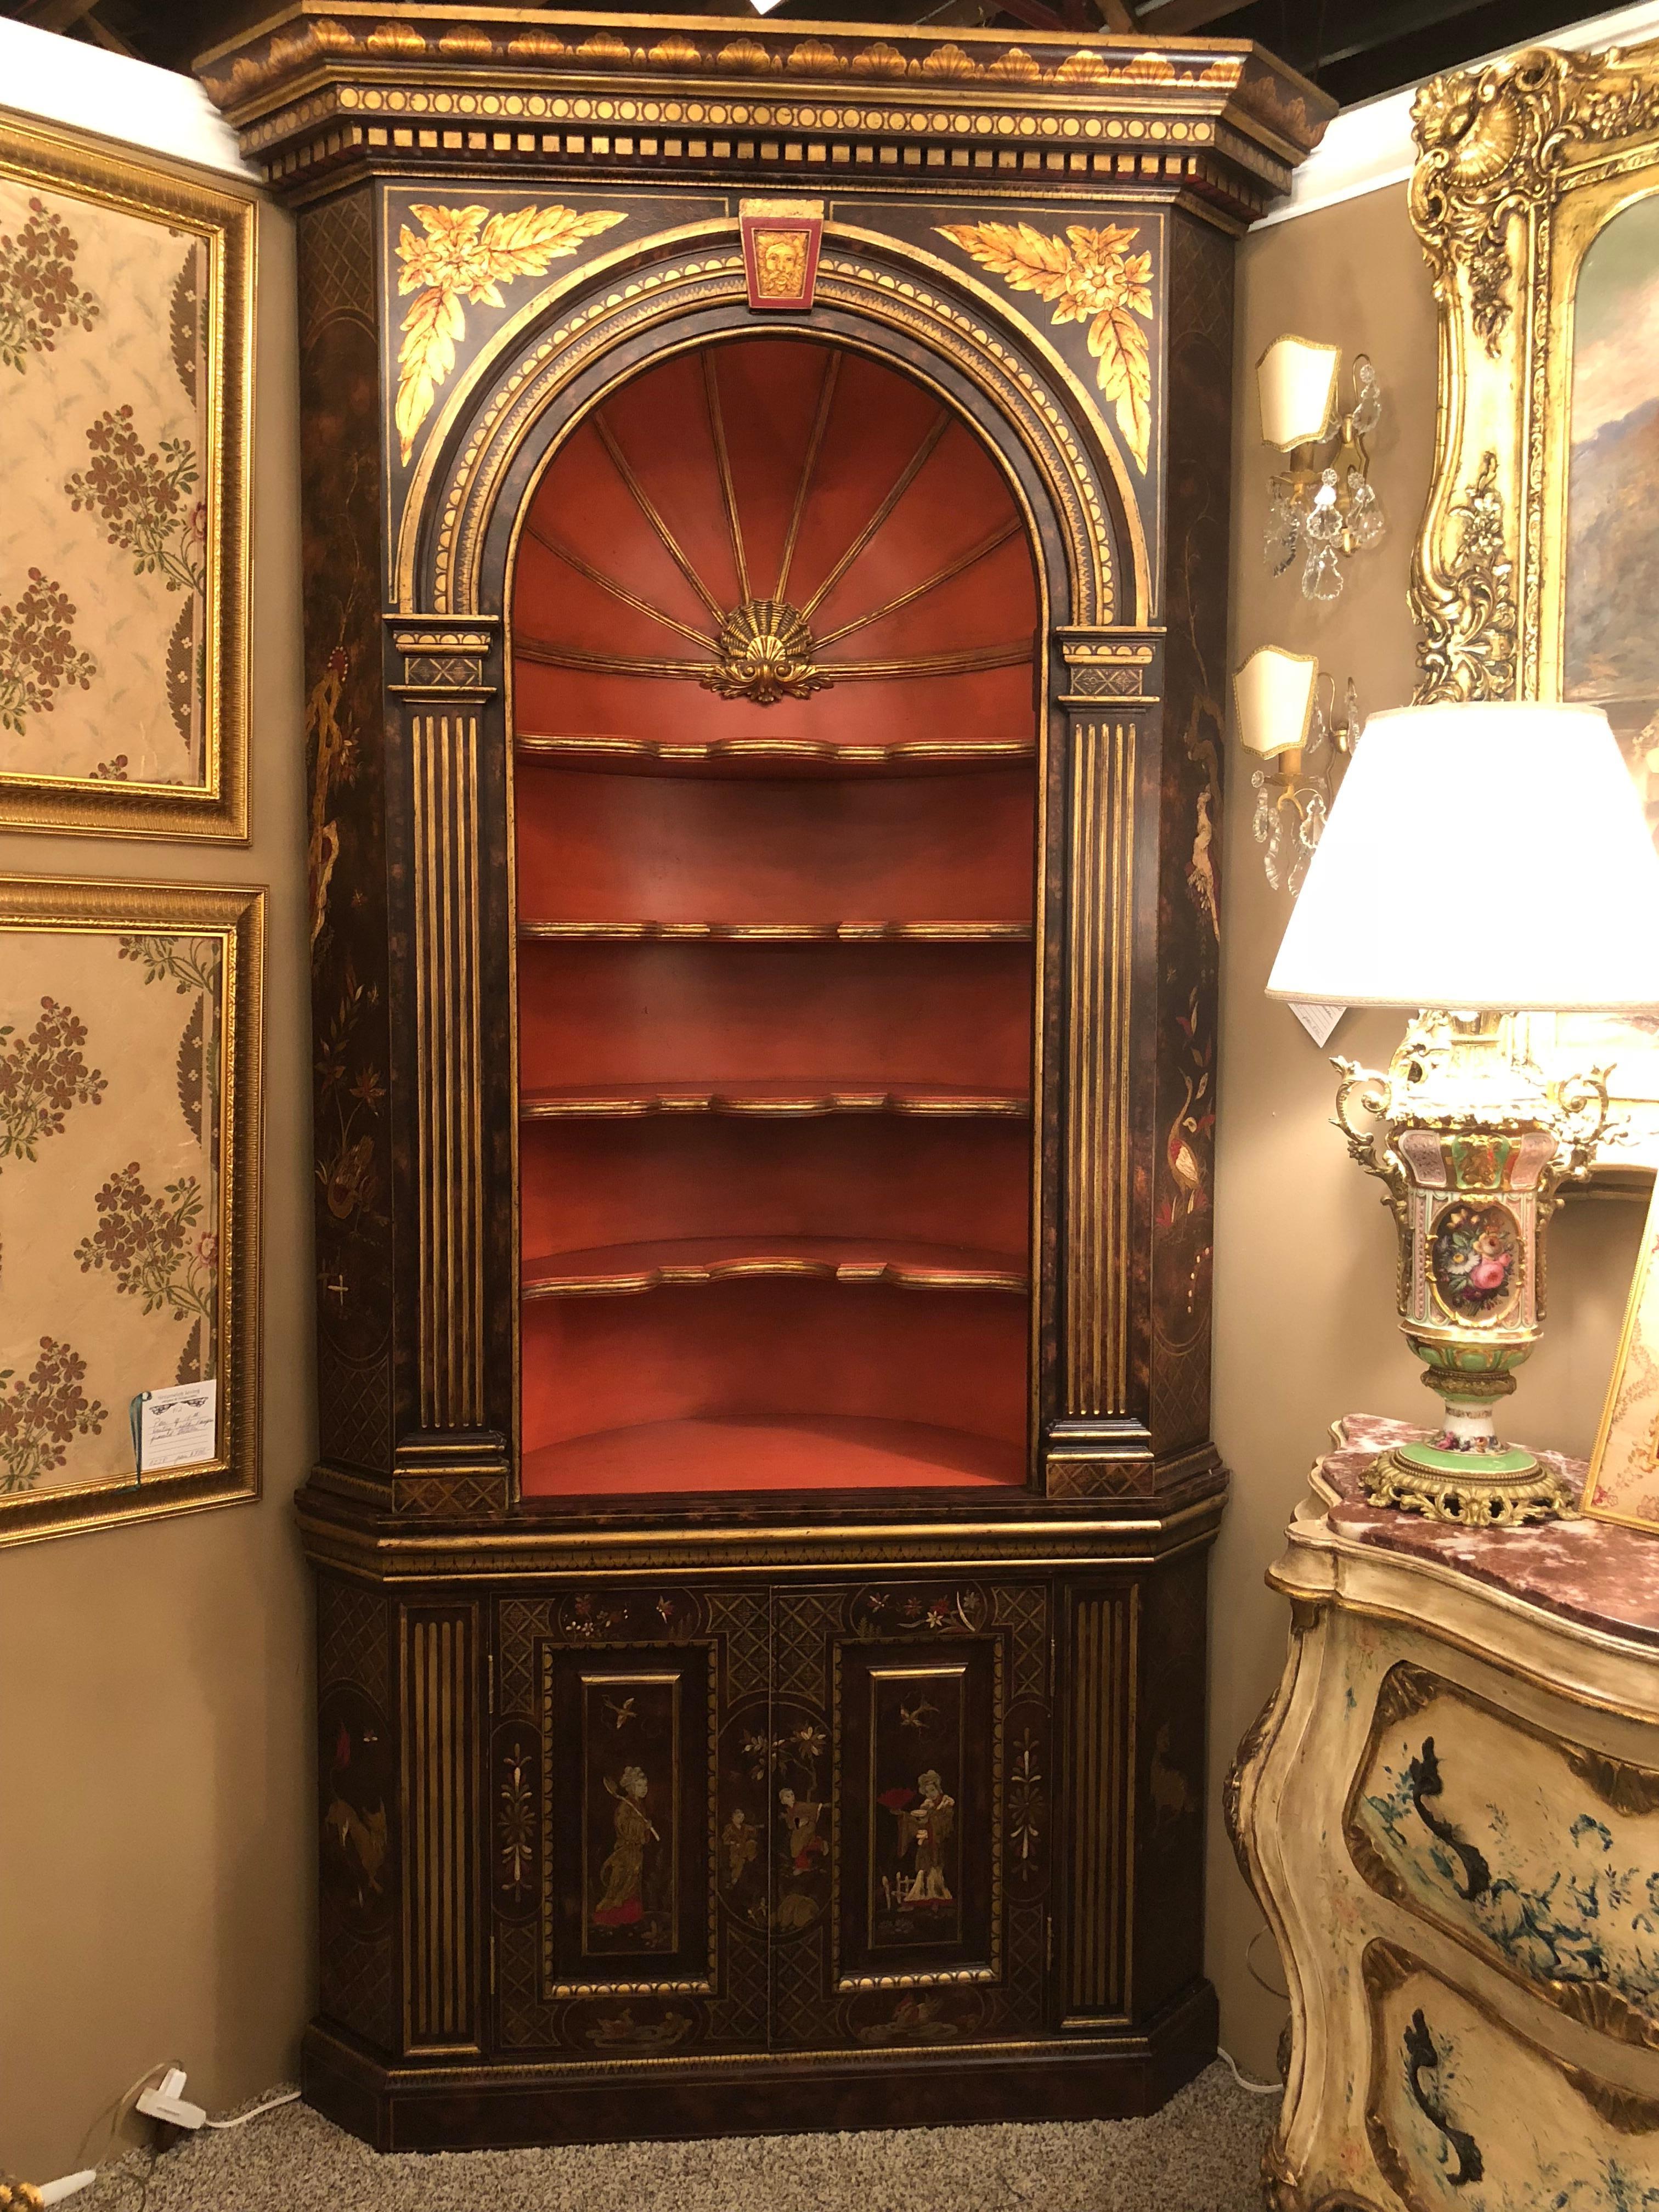 A fine and palatial one of a kind pair of black painted corner cupboards with pared gilt decoration and red painted open shelf. One in its original 19th century construction and the other custom copied in the early to mid-1900s. These fine and